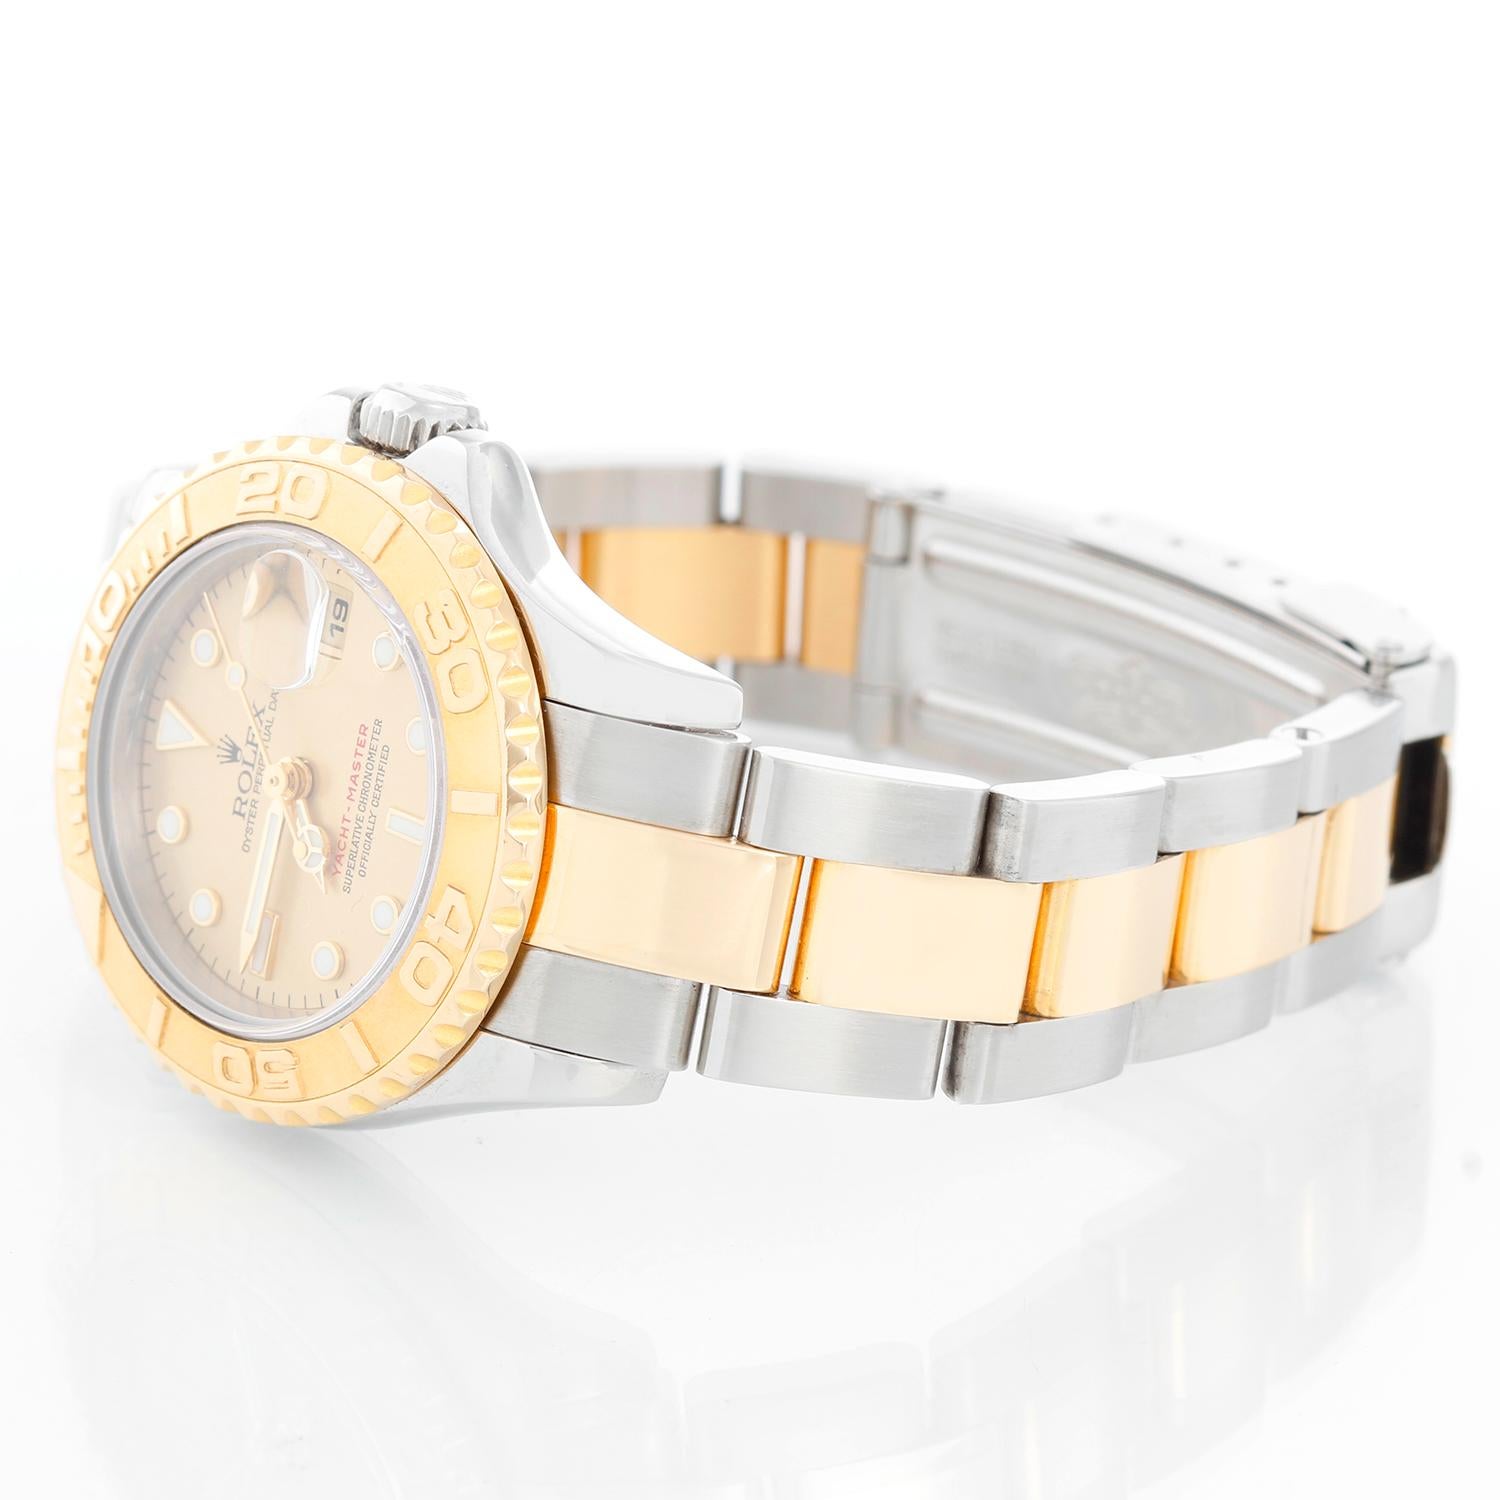 Rolex Ladies Yacht-Master 2-Tone Watch 169623 - Automatic winding; sapphire crystal. Stainless steel case with 18k yellow gold bezel ( 29 mm ) . Champagne dial with luminous hour markers. Stainless steel and 18k yellow gold Oyster bracelet with